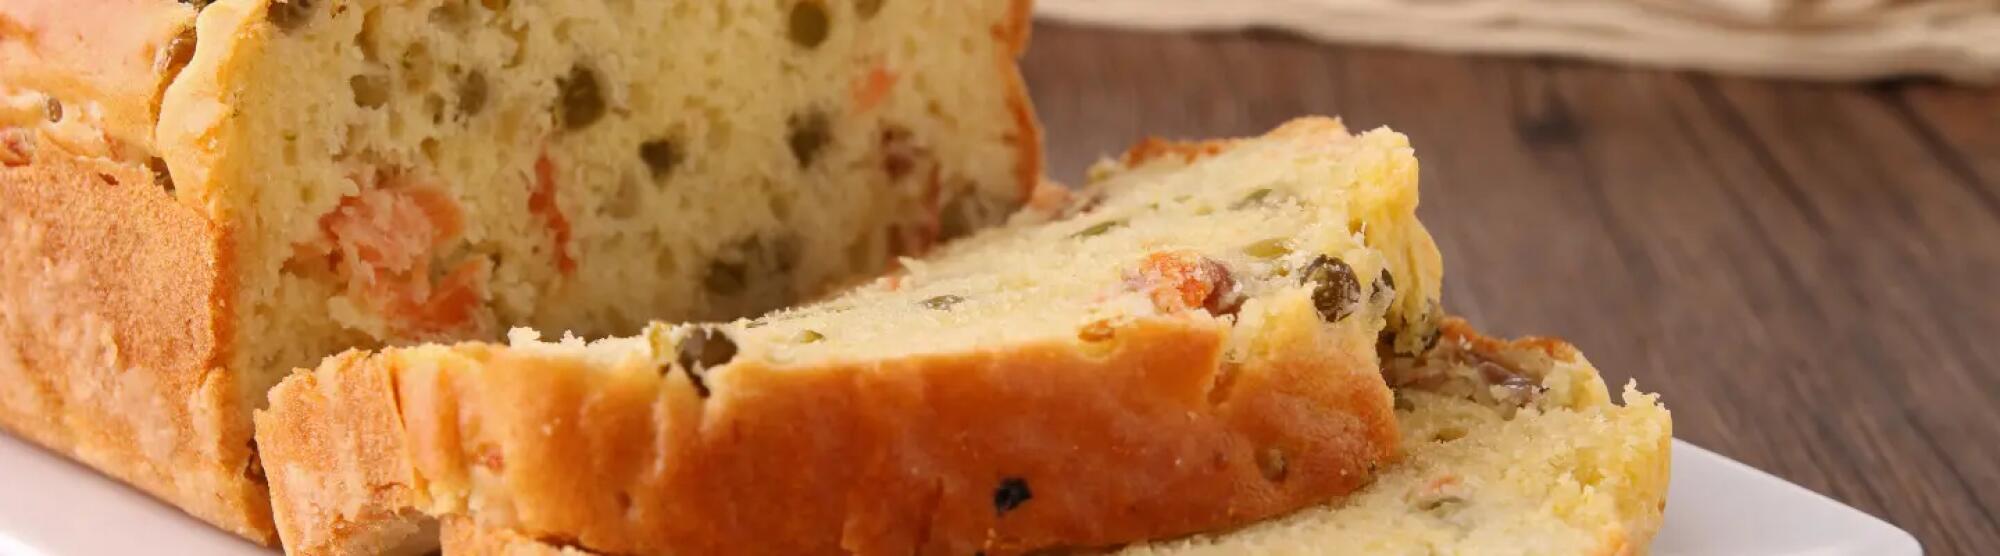 Recette : Cake au fromage, curry et crabe